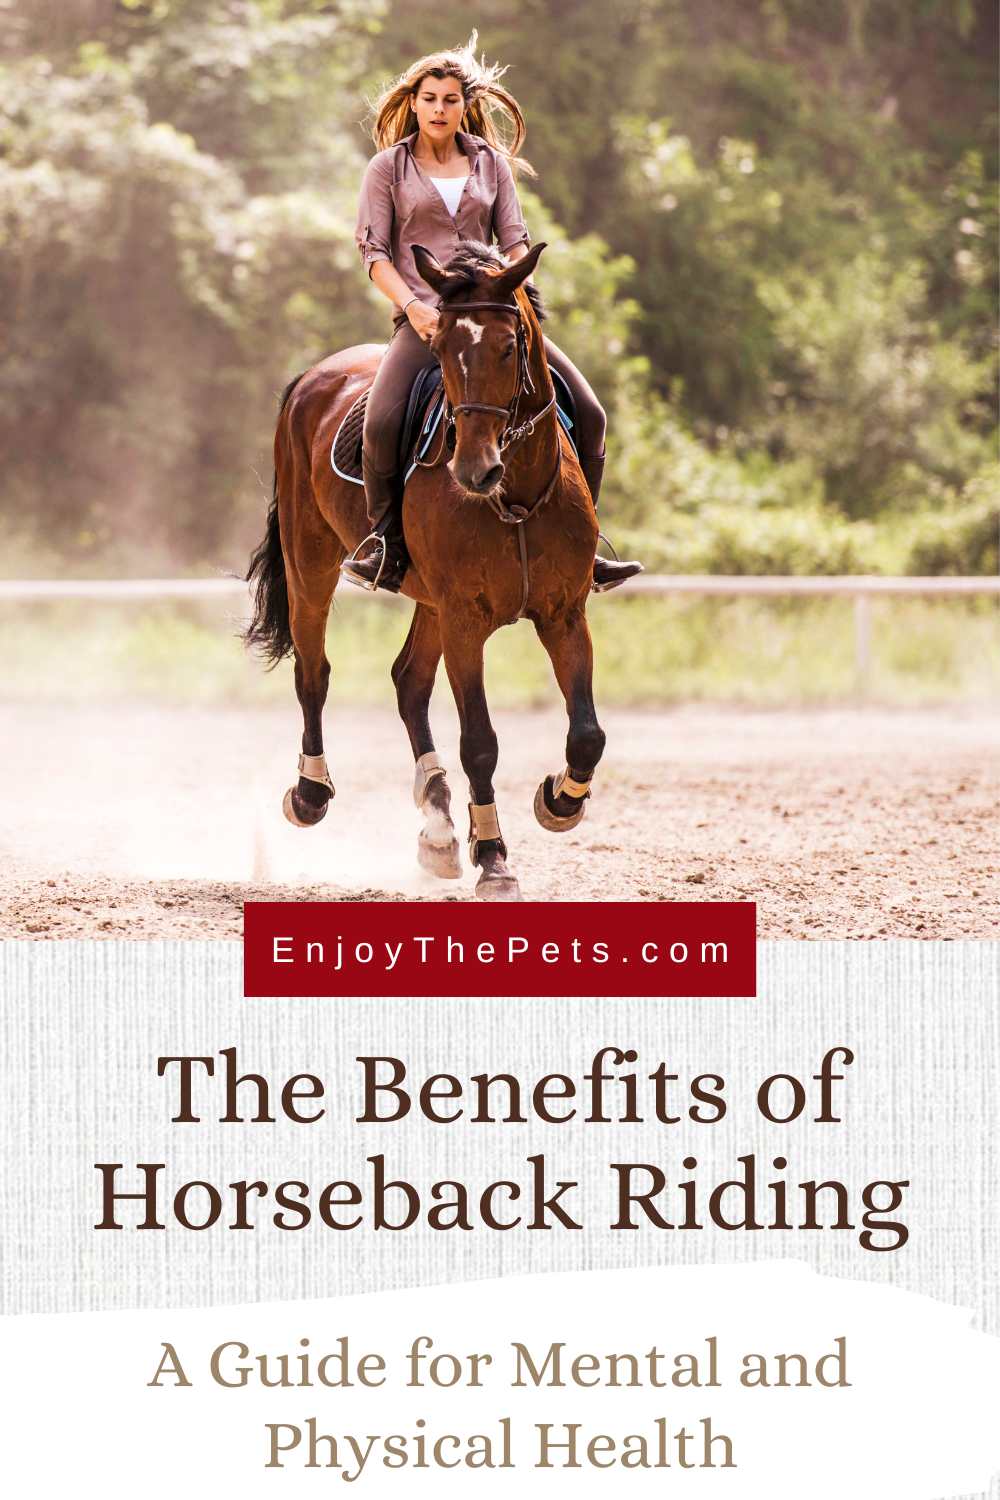 The Benefits of Horseback Riding A Guide for Mental and Physical Health